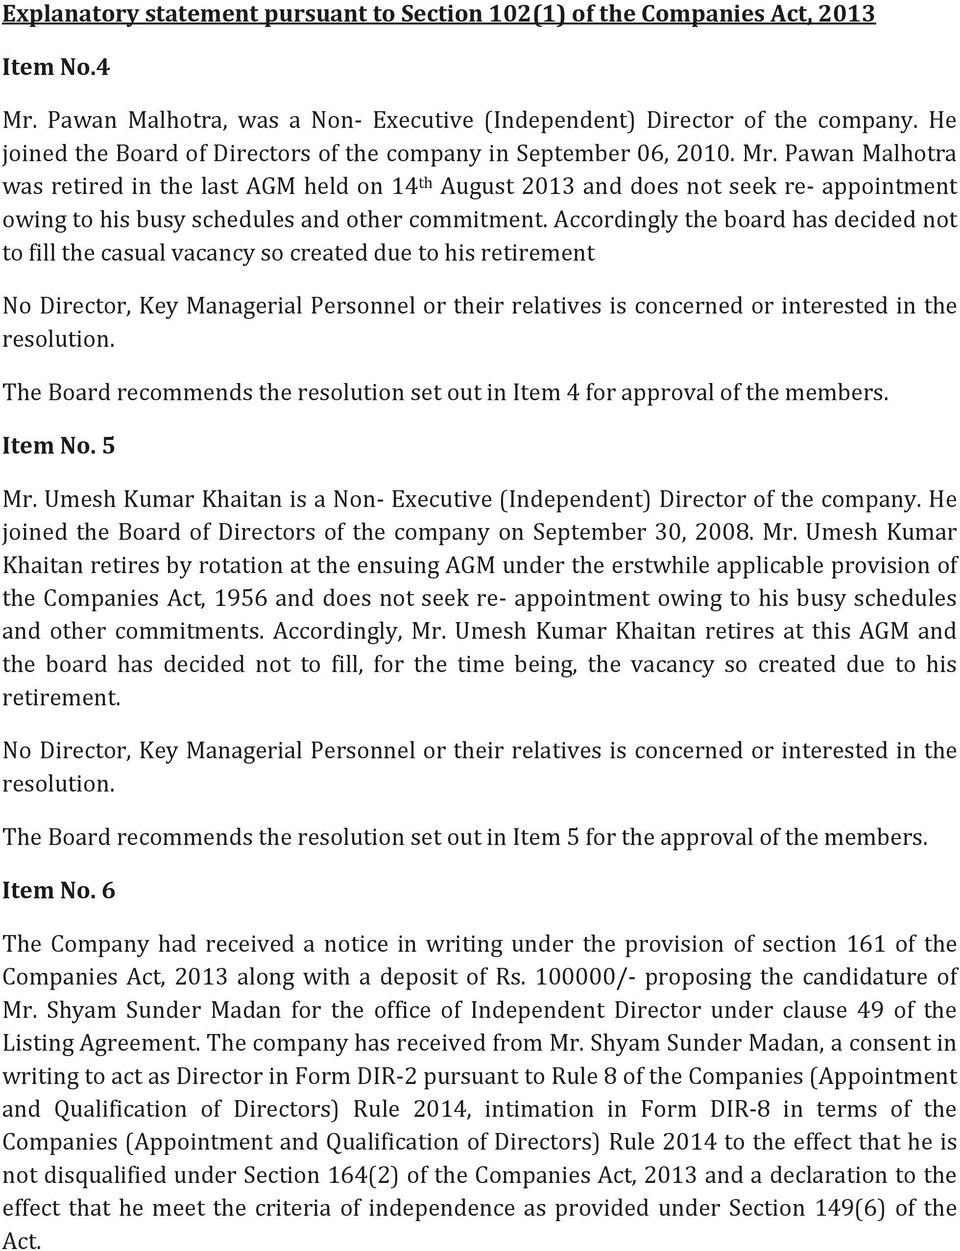 Pawan Malhotra was retired in the last AGM held on 14 th August 2013 and does not seek re- appointment owing to his busy schedules and other commitment.